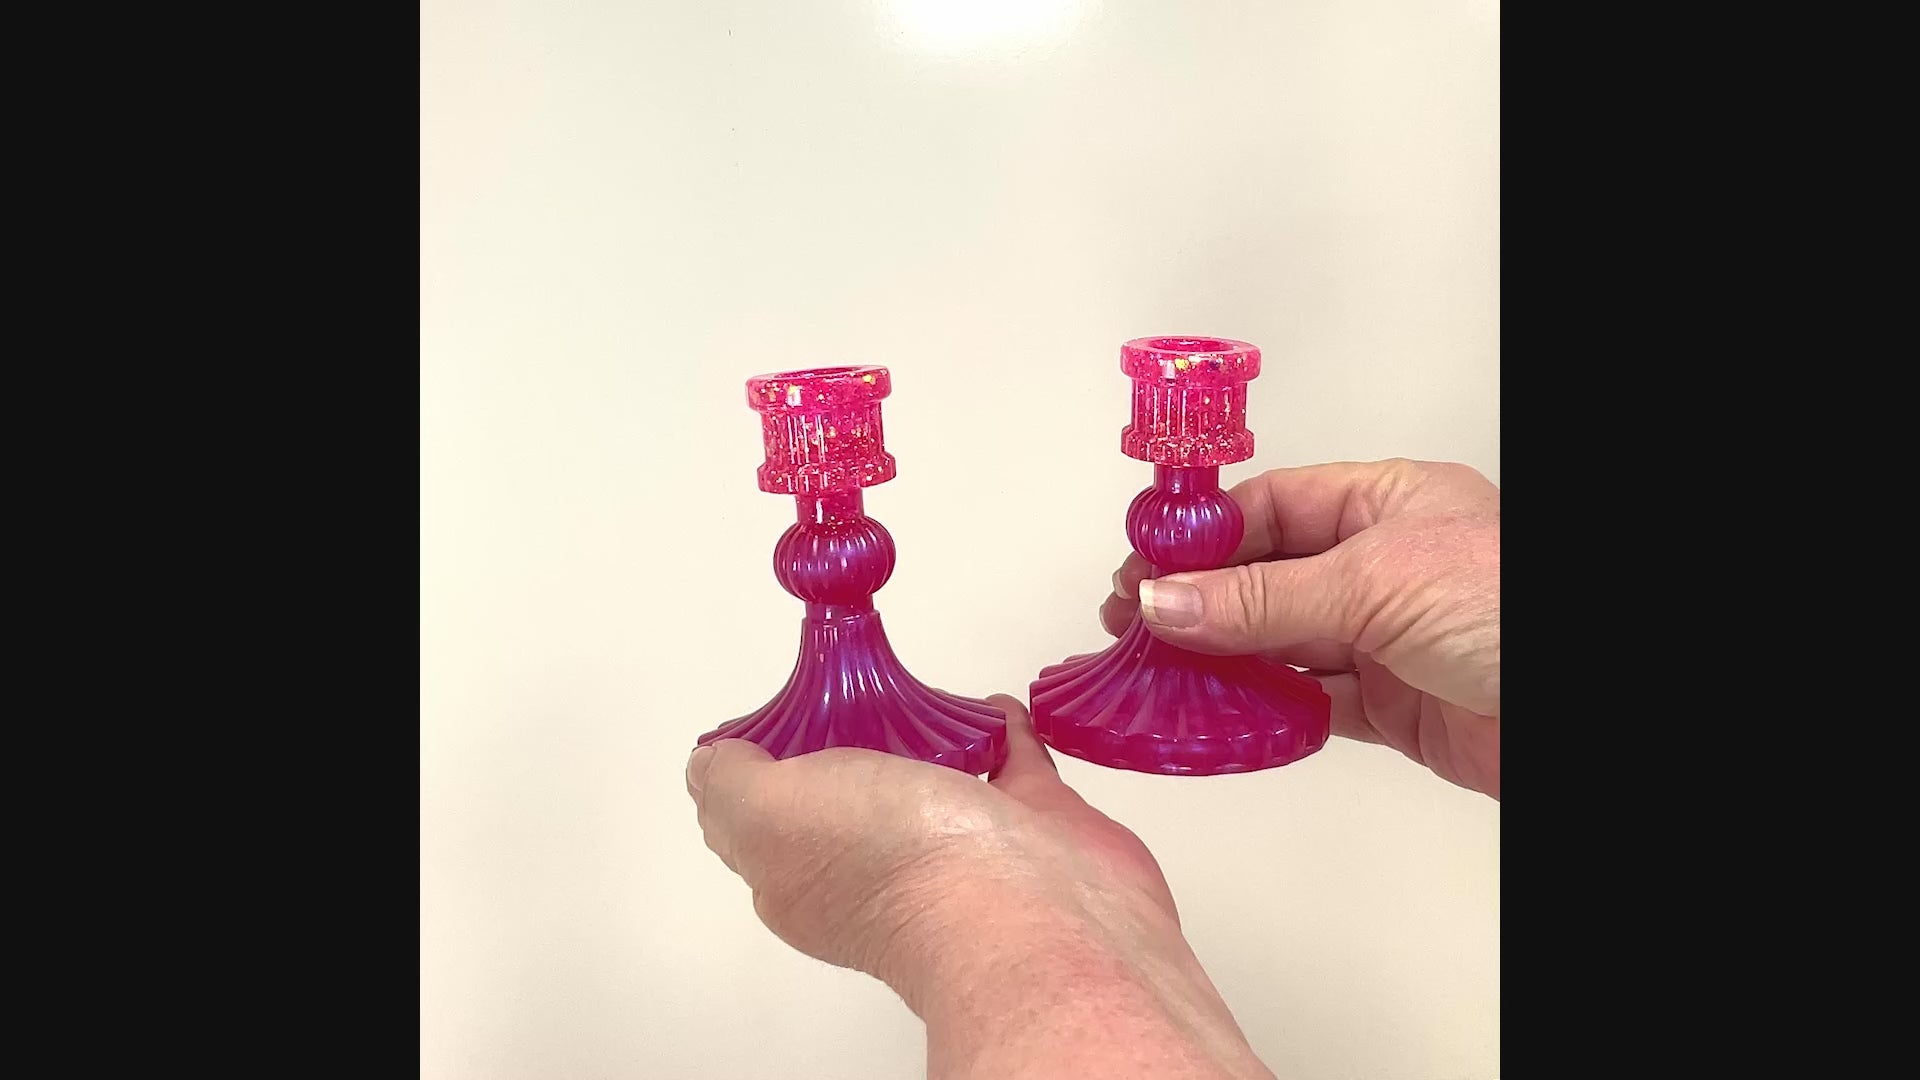 Vintage Style Handmade Bright Pearly Pink Resin Candlestick Holders video showing how the glitter sparkles in the light.